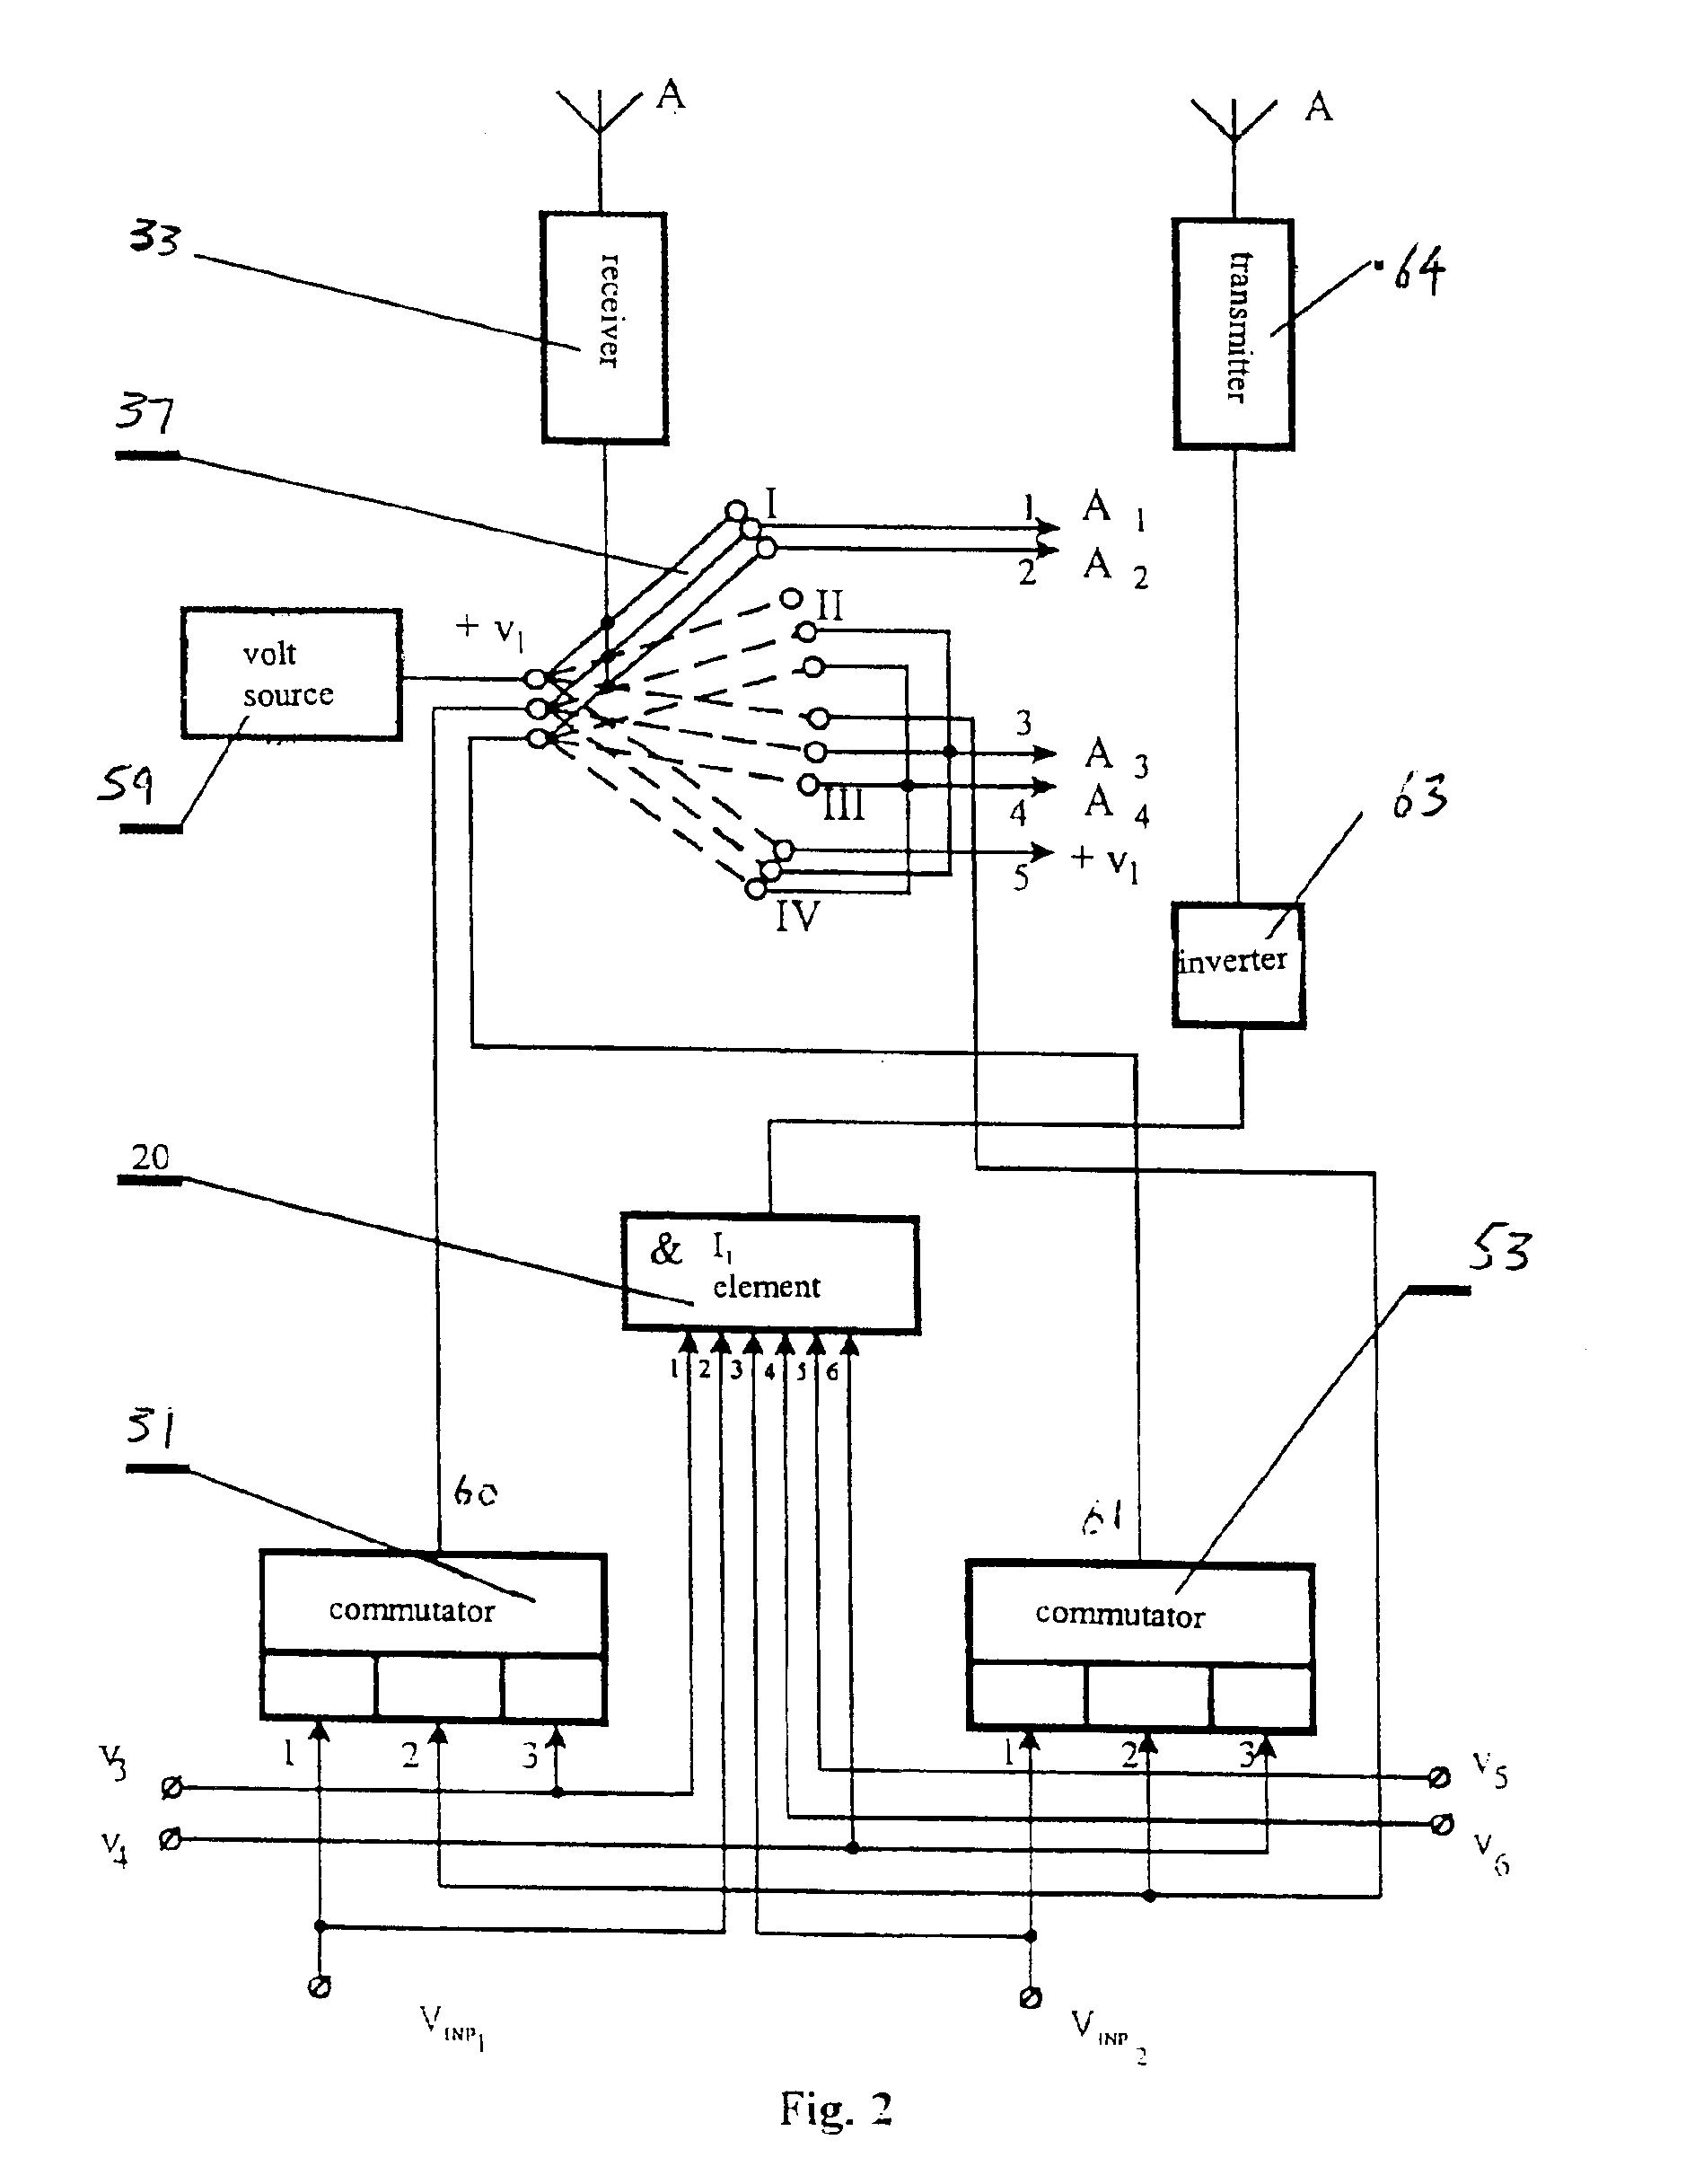 System for illuminating an object